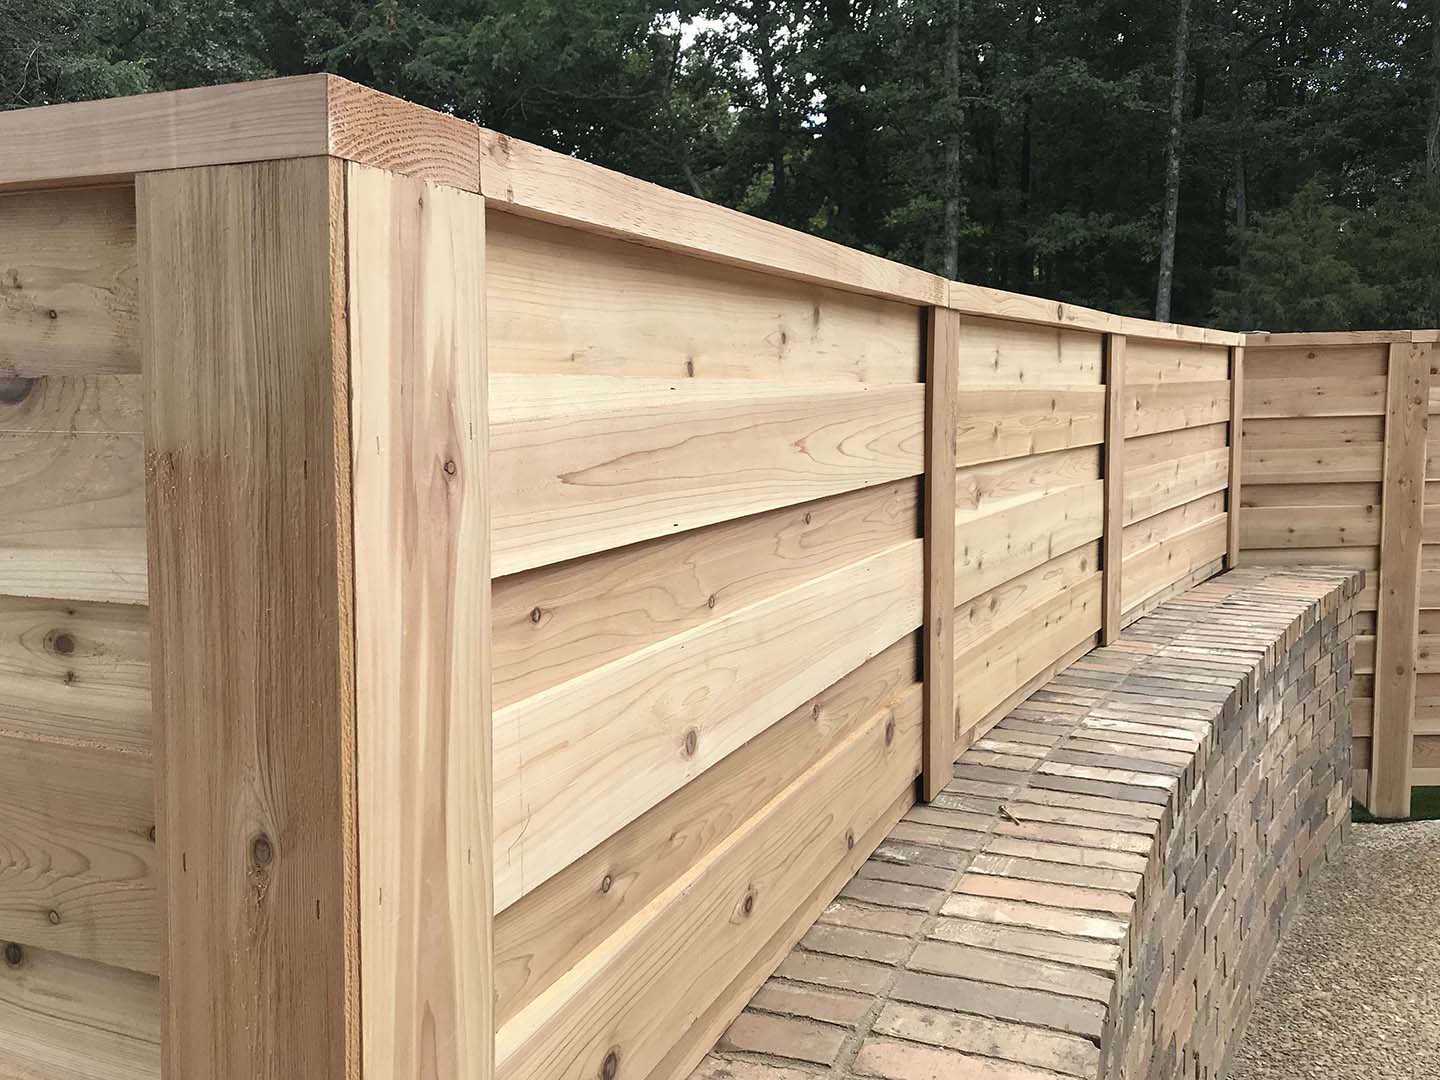 College Station TX cap and trim style wood fence